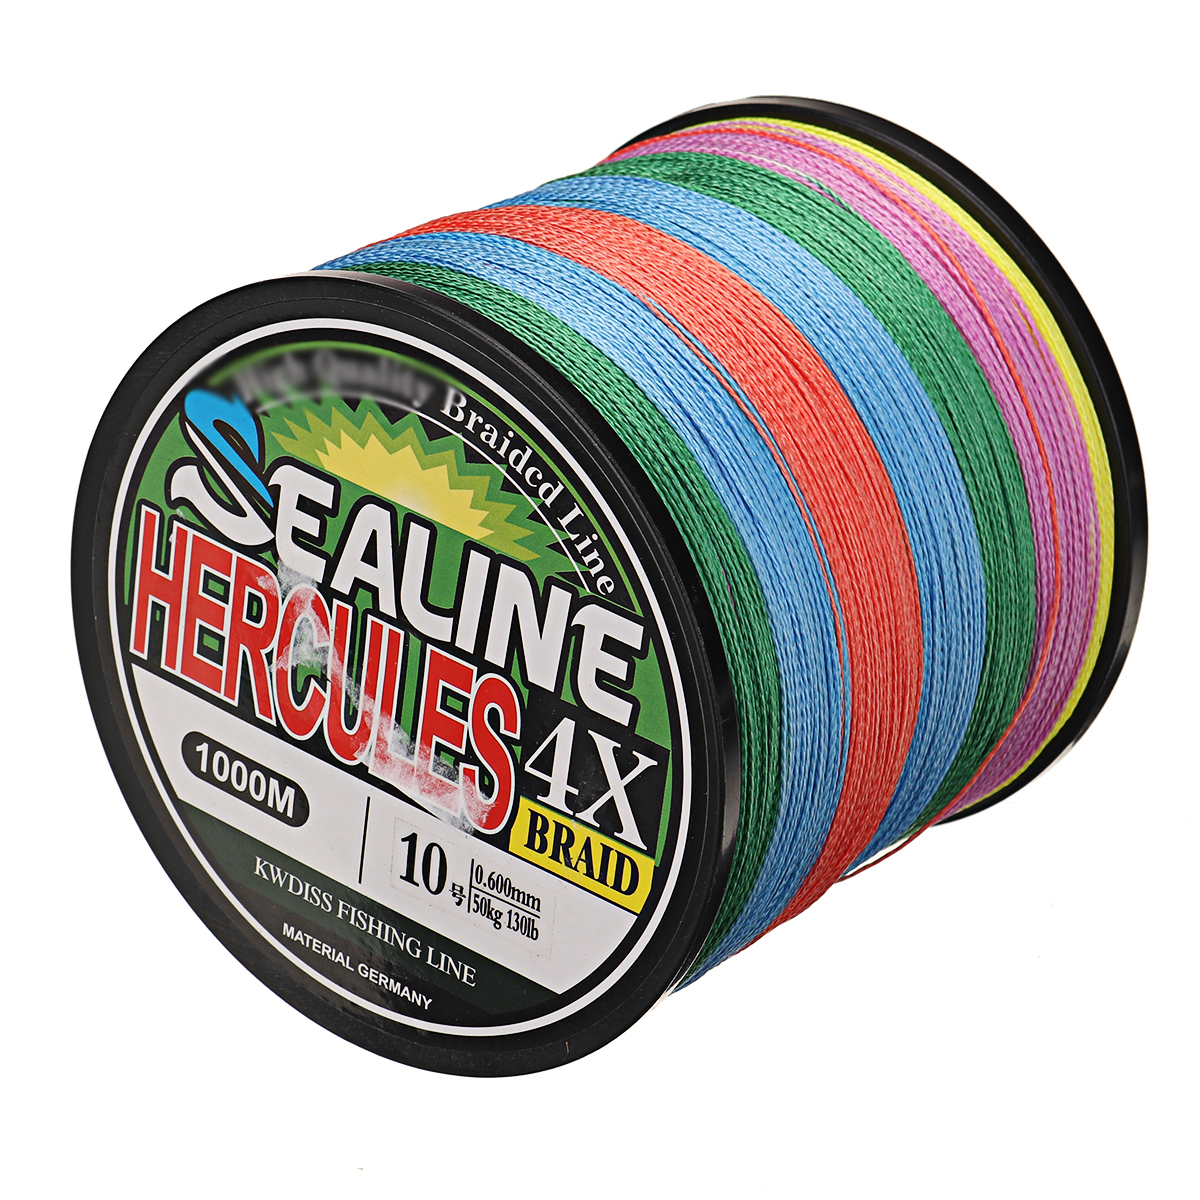 ZANLURE-Super-Strong-Braided-Fishing-Line-1000m-4-Strands-PE-Braid-1015305580130lbs-Fishing-Tackle-1837670-9